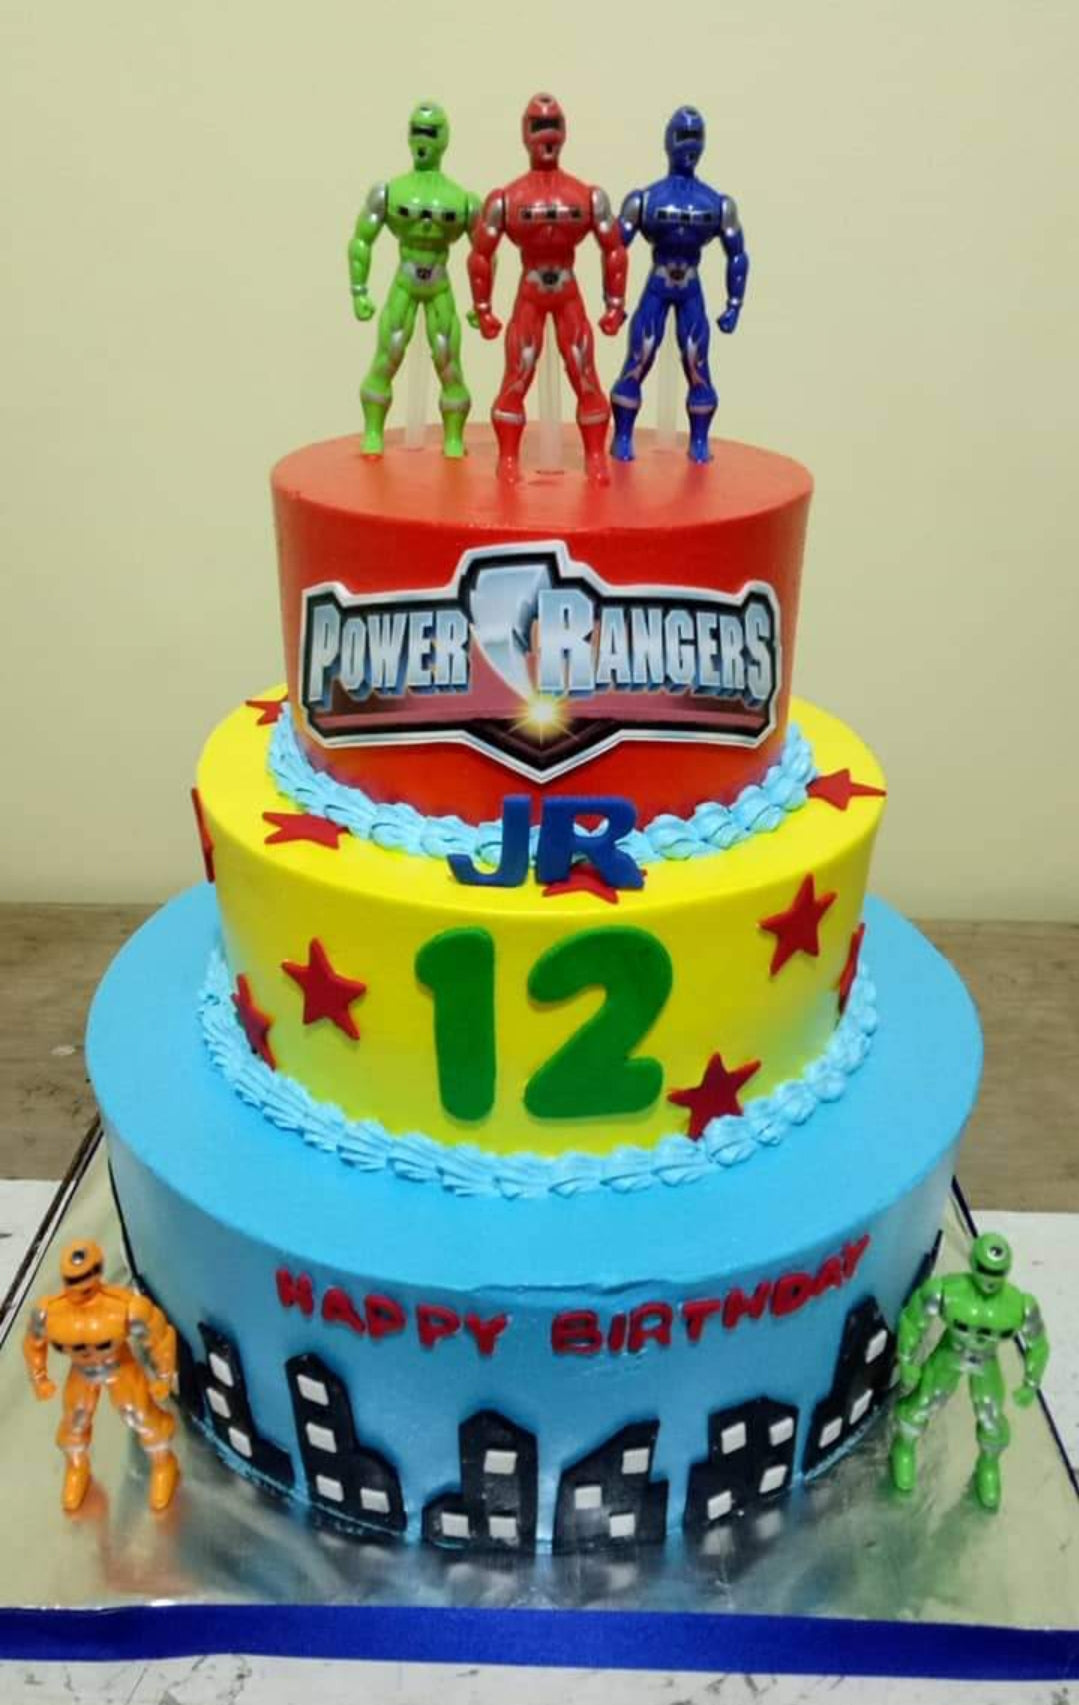 Lukhona's Birthday Cake + Package Power Ranger Cup - Angies Cakes